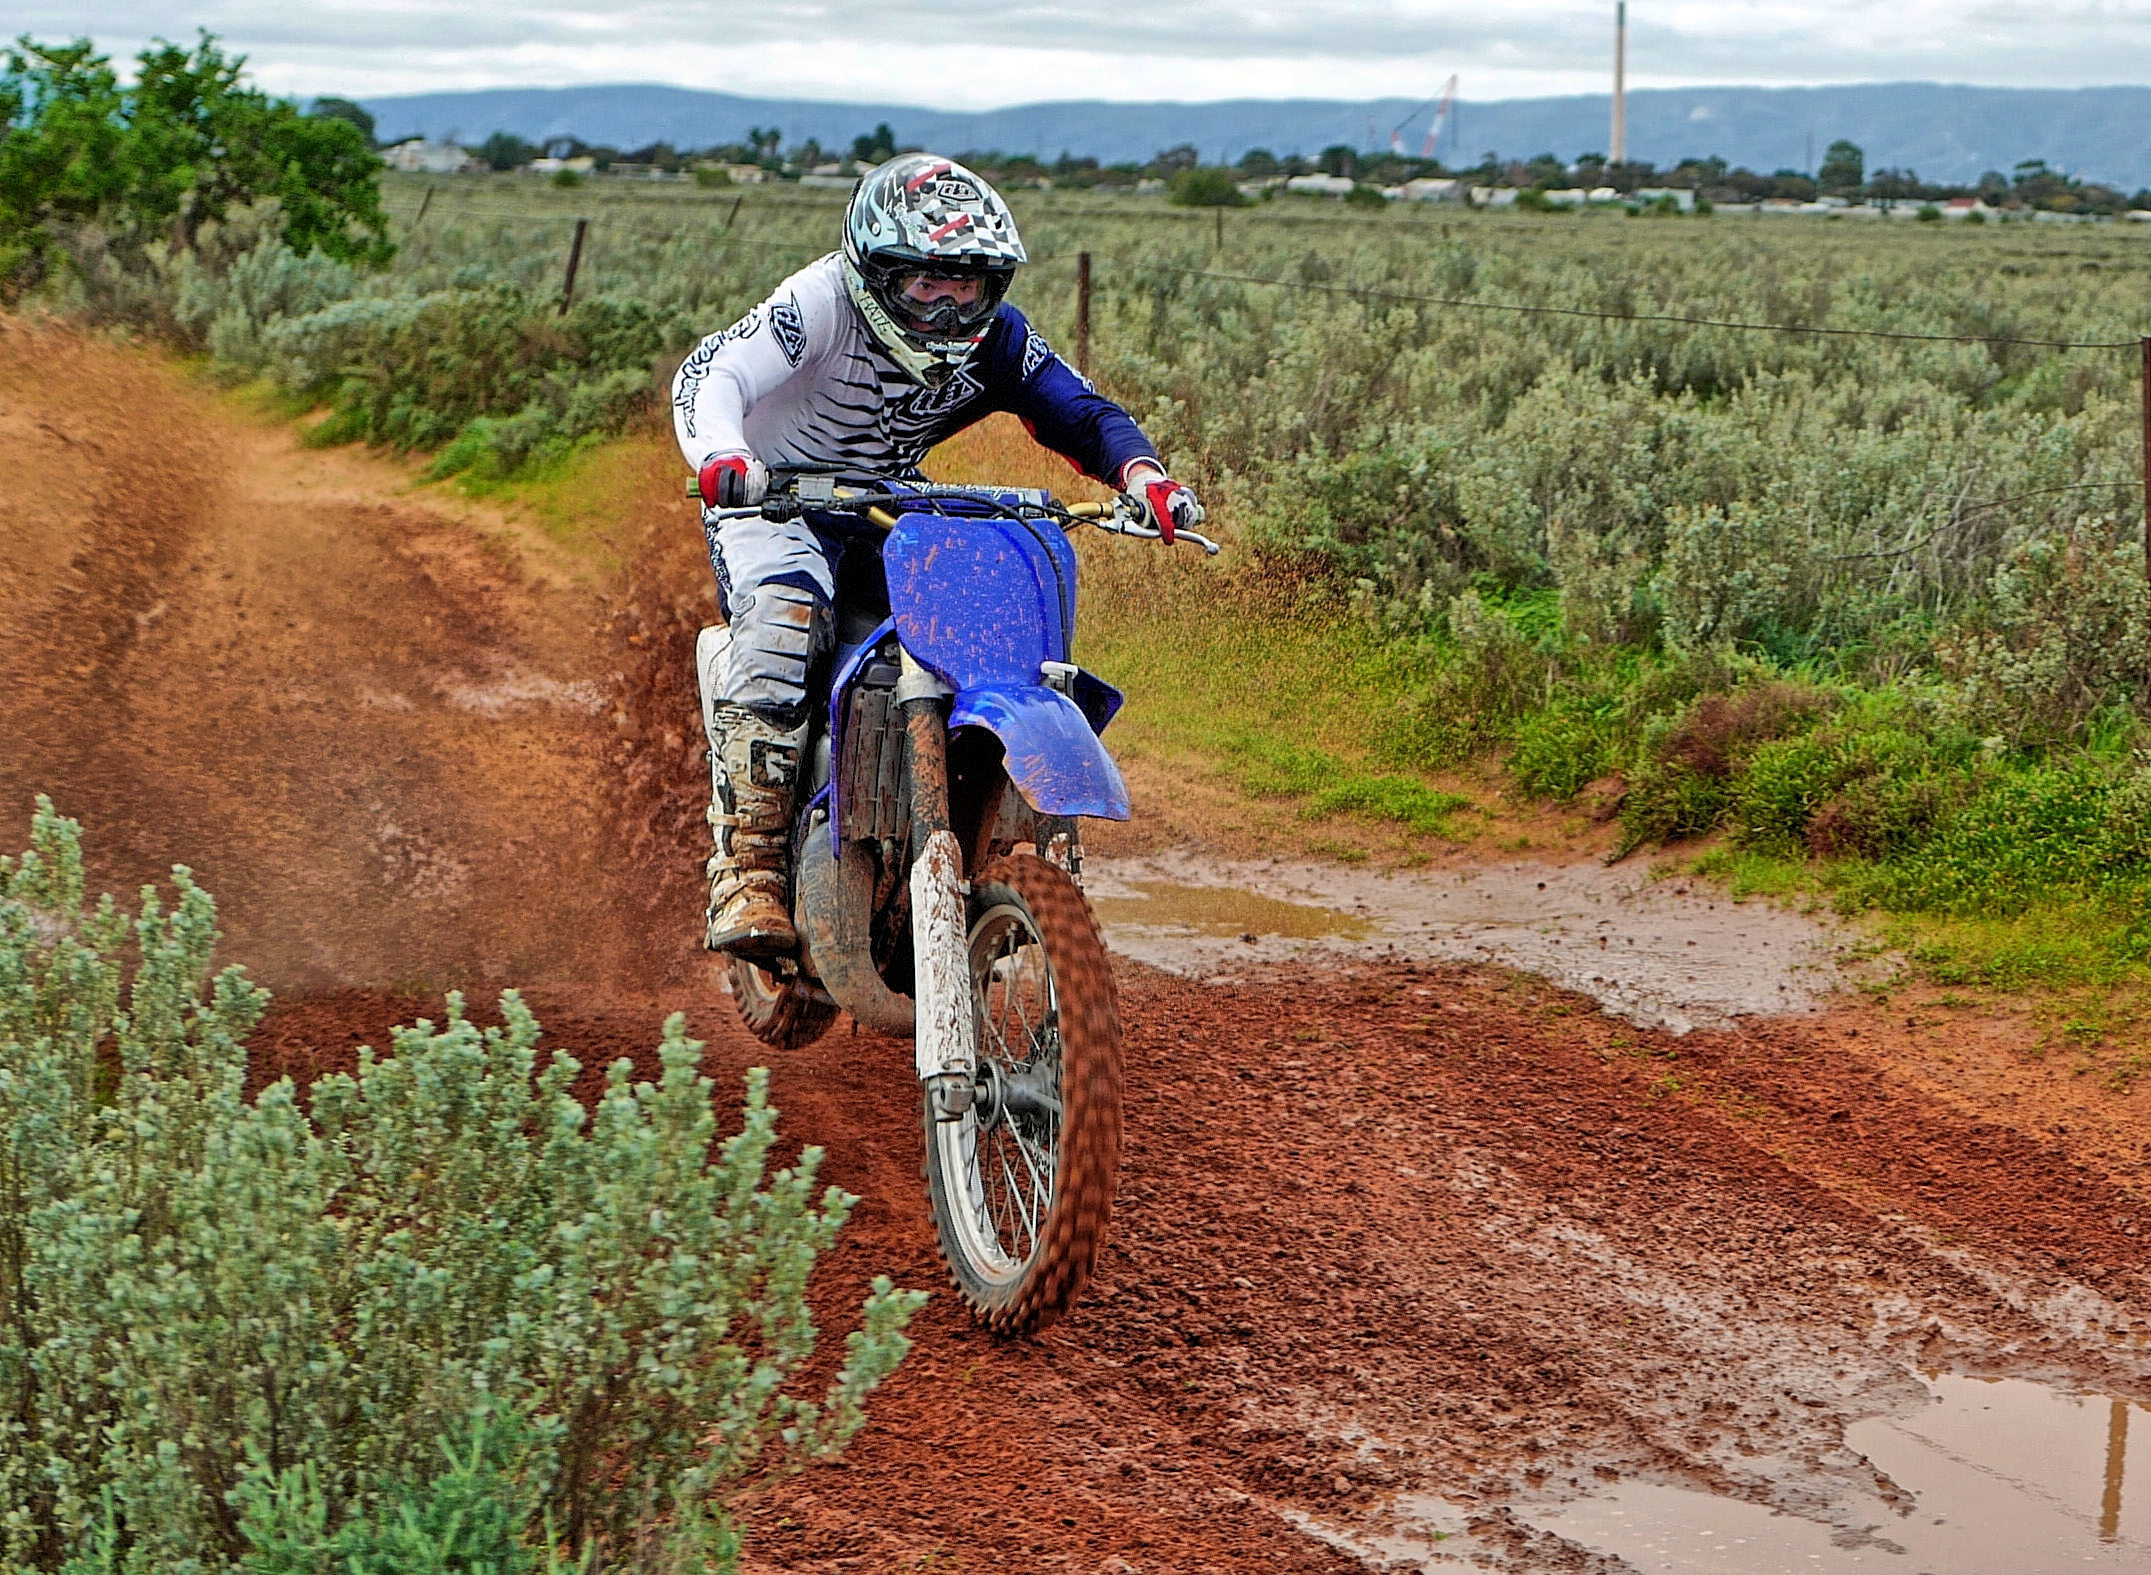 Motocross Motorcycle Offroad 2151x1575